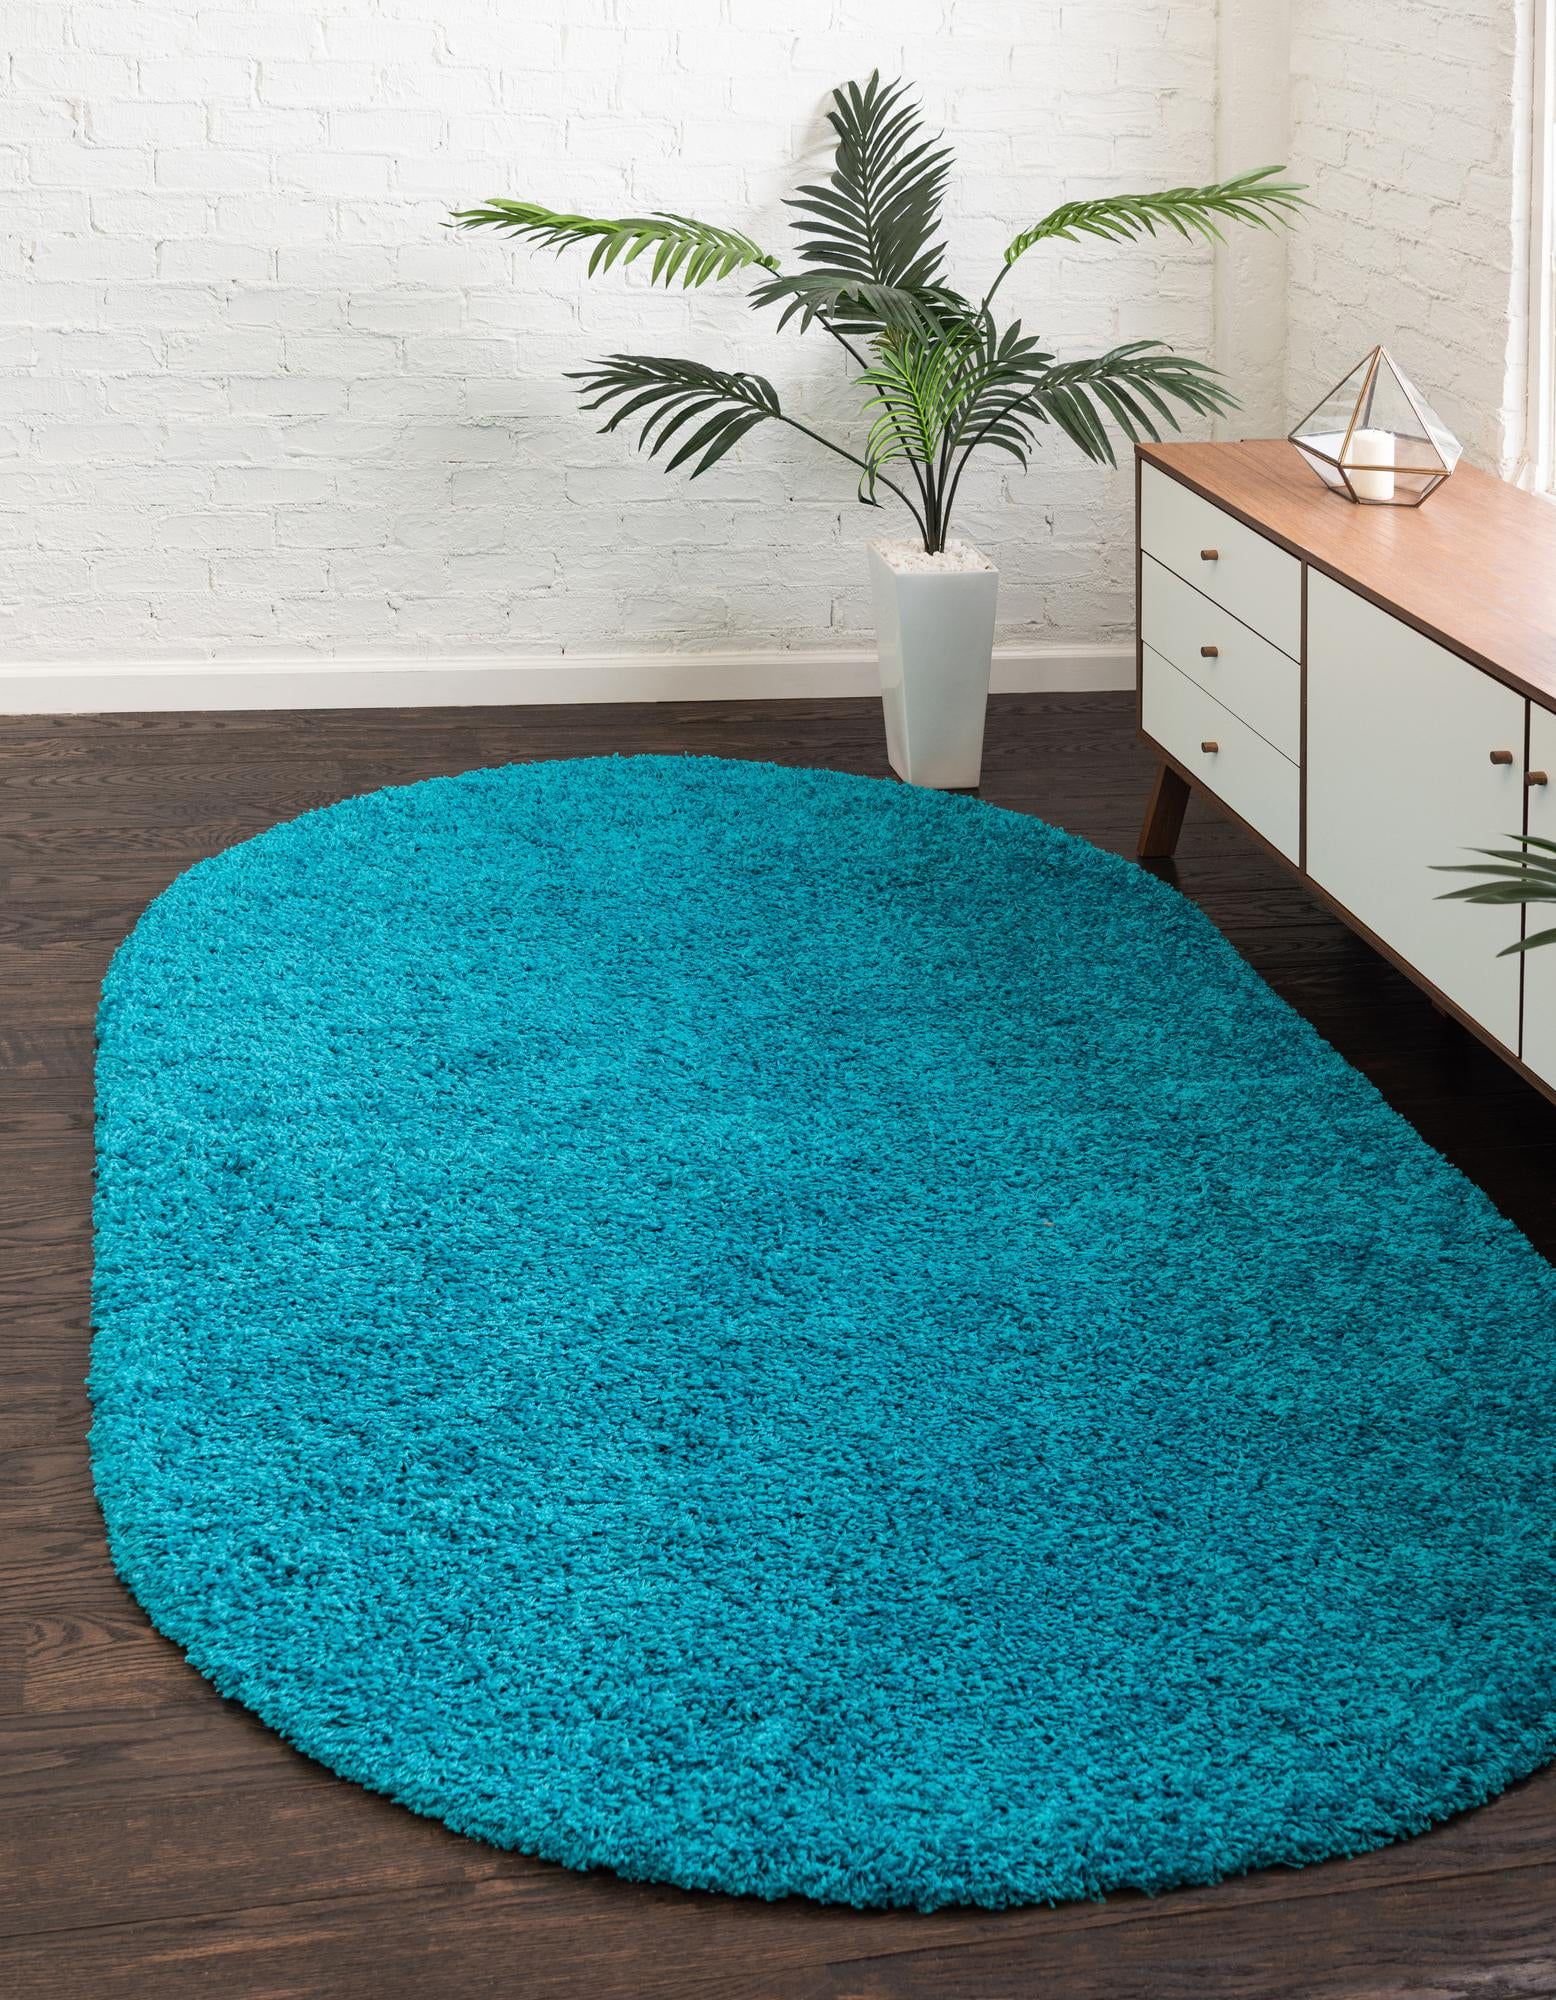 Rugs Solid Shag Collection Rug – 8' X 10' Oval Turquoise Shag Rug  Perfect For Living Rooms, Large Dining Rooms, Open Floorplans – Walmart Throughout Shag Oval Rugs (View 9 of 15)